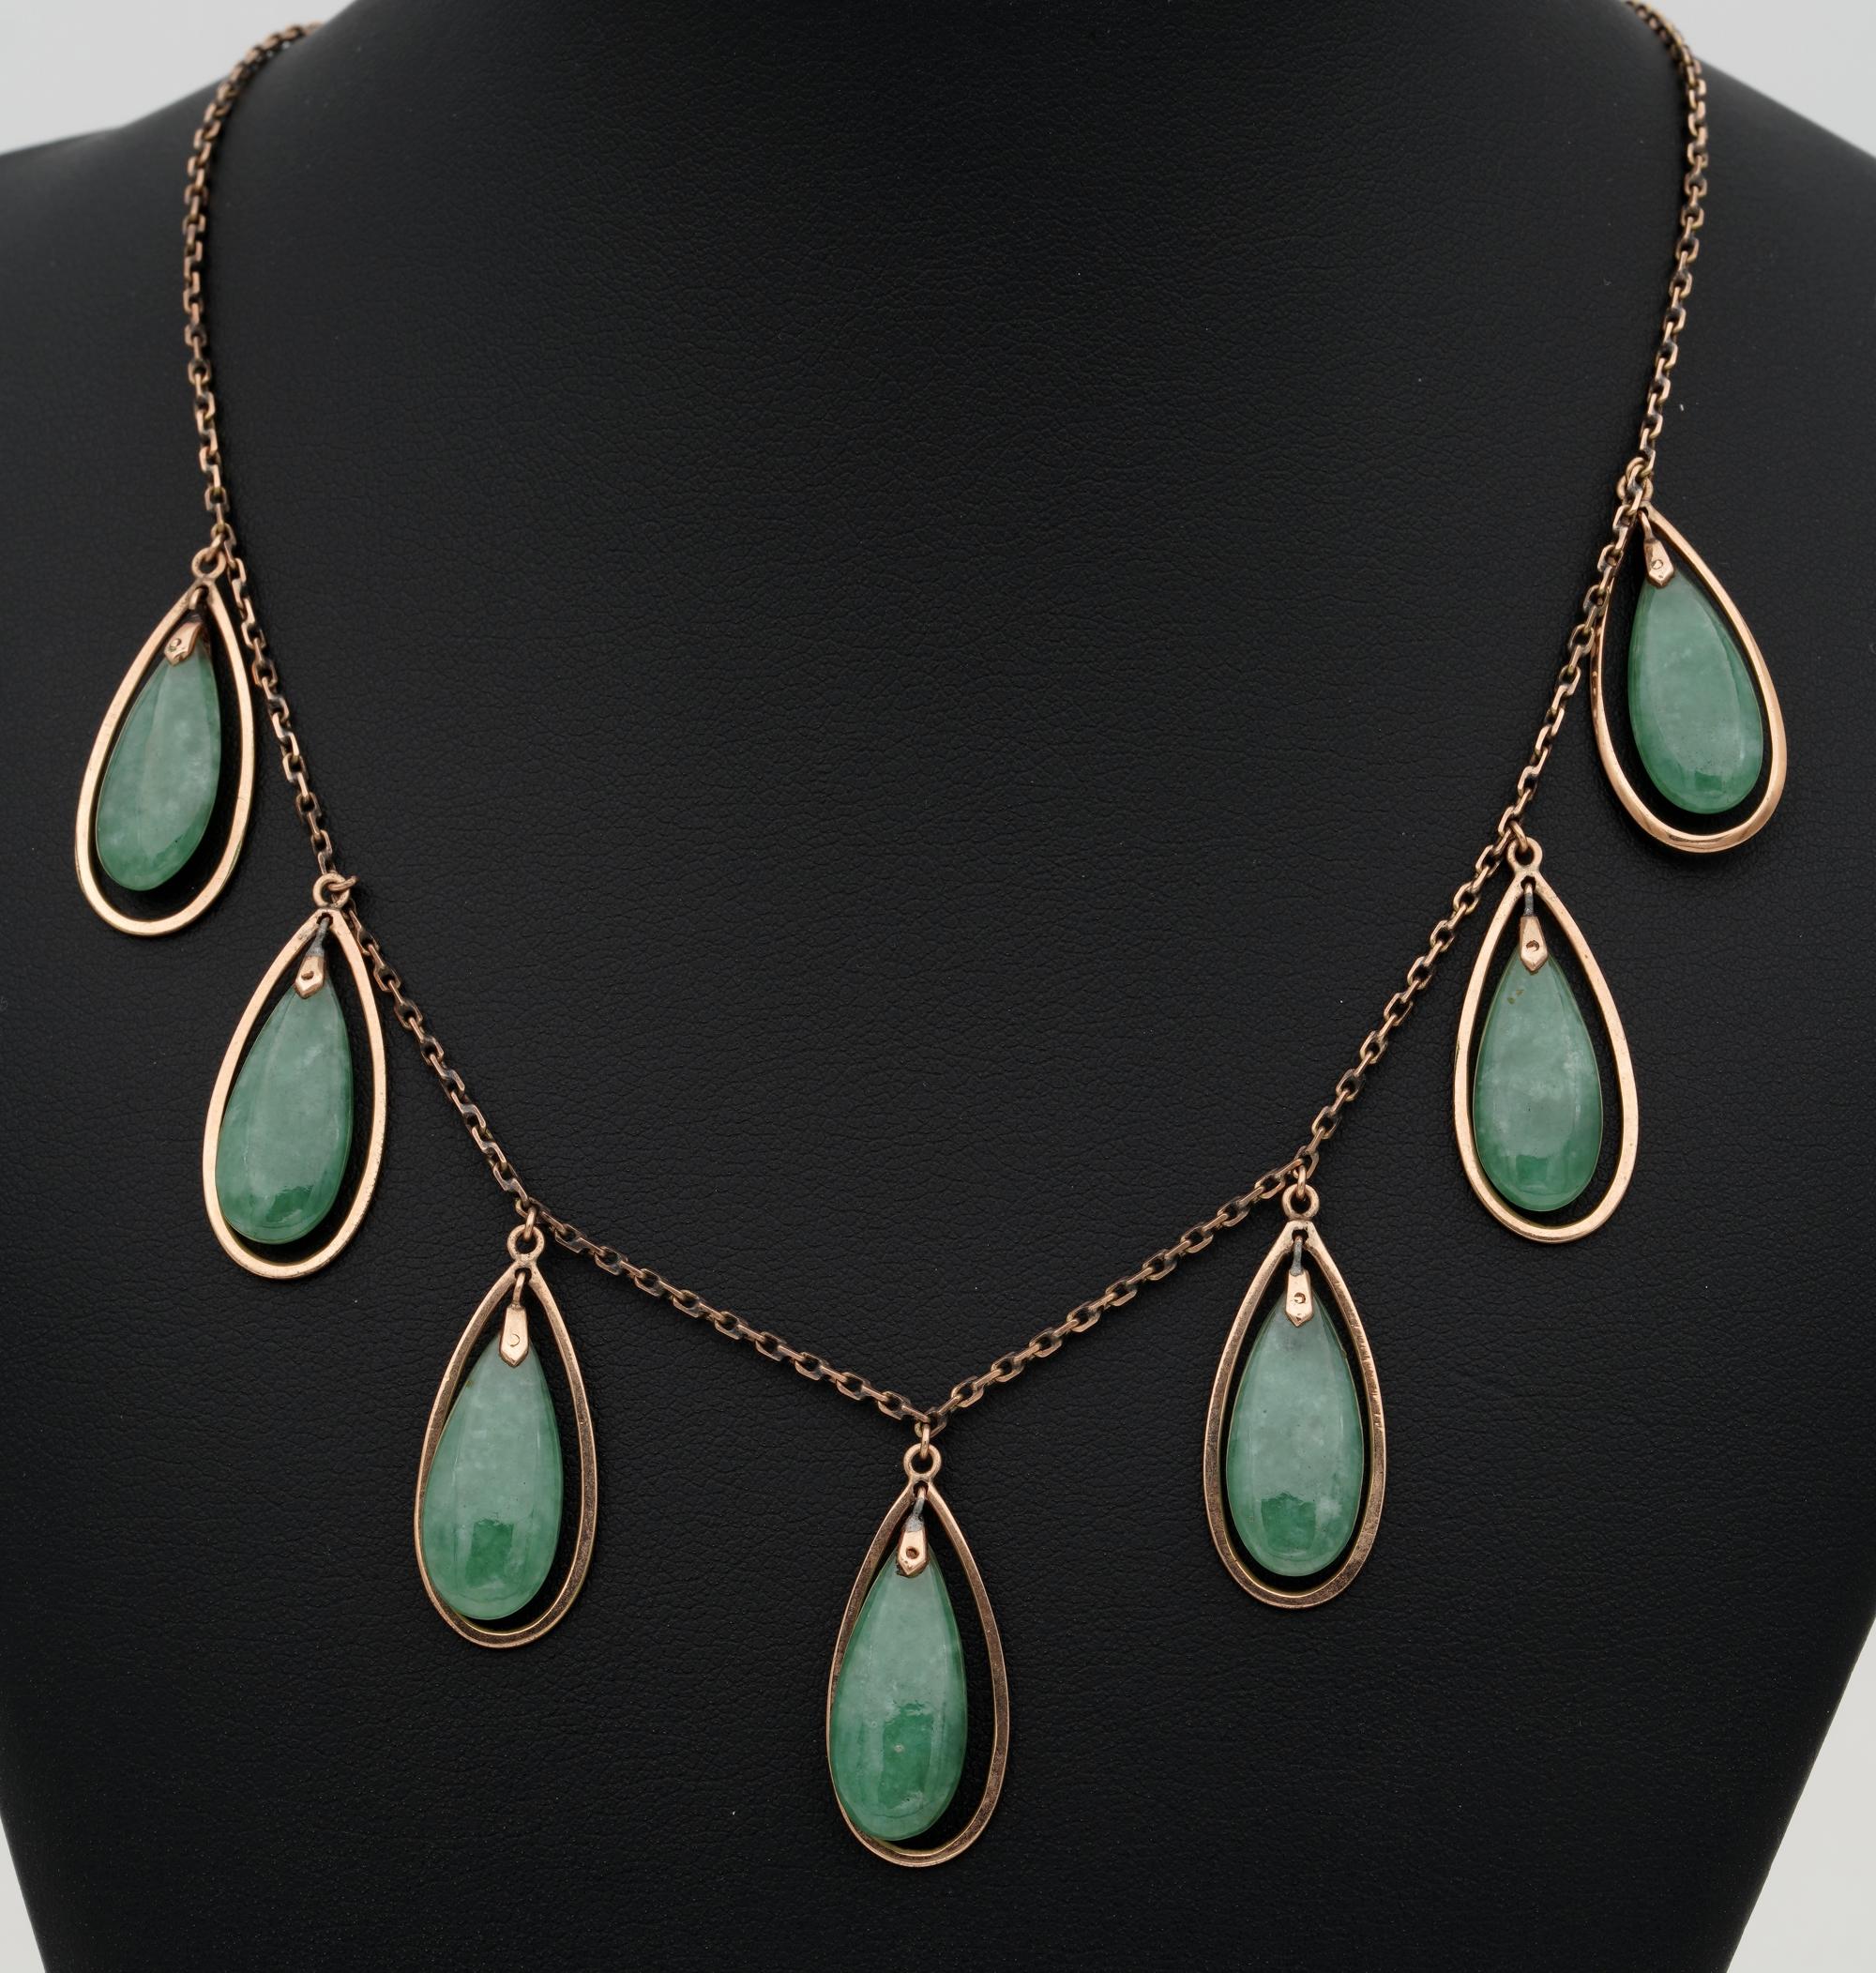 This is so Beautiful!

For sale this delightful genuine Victorian 14 KT solid gold necklace
Consisting of multi drops of 100% Natural Jade mounted on 14 KT gold
Jade is not impregnated or tinted but totally natural lovely medium apple green
Drops